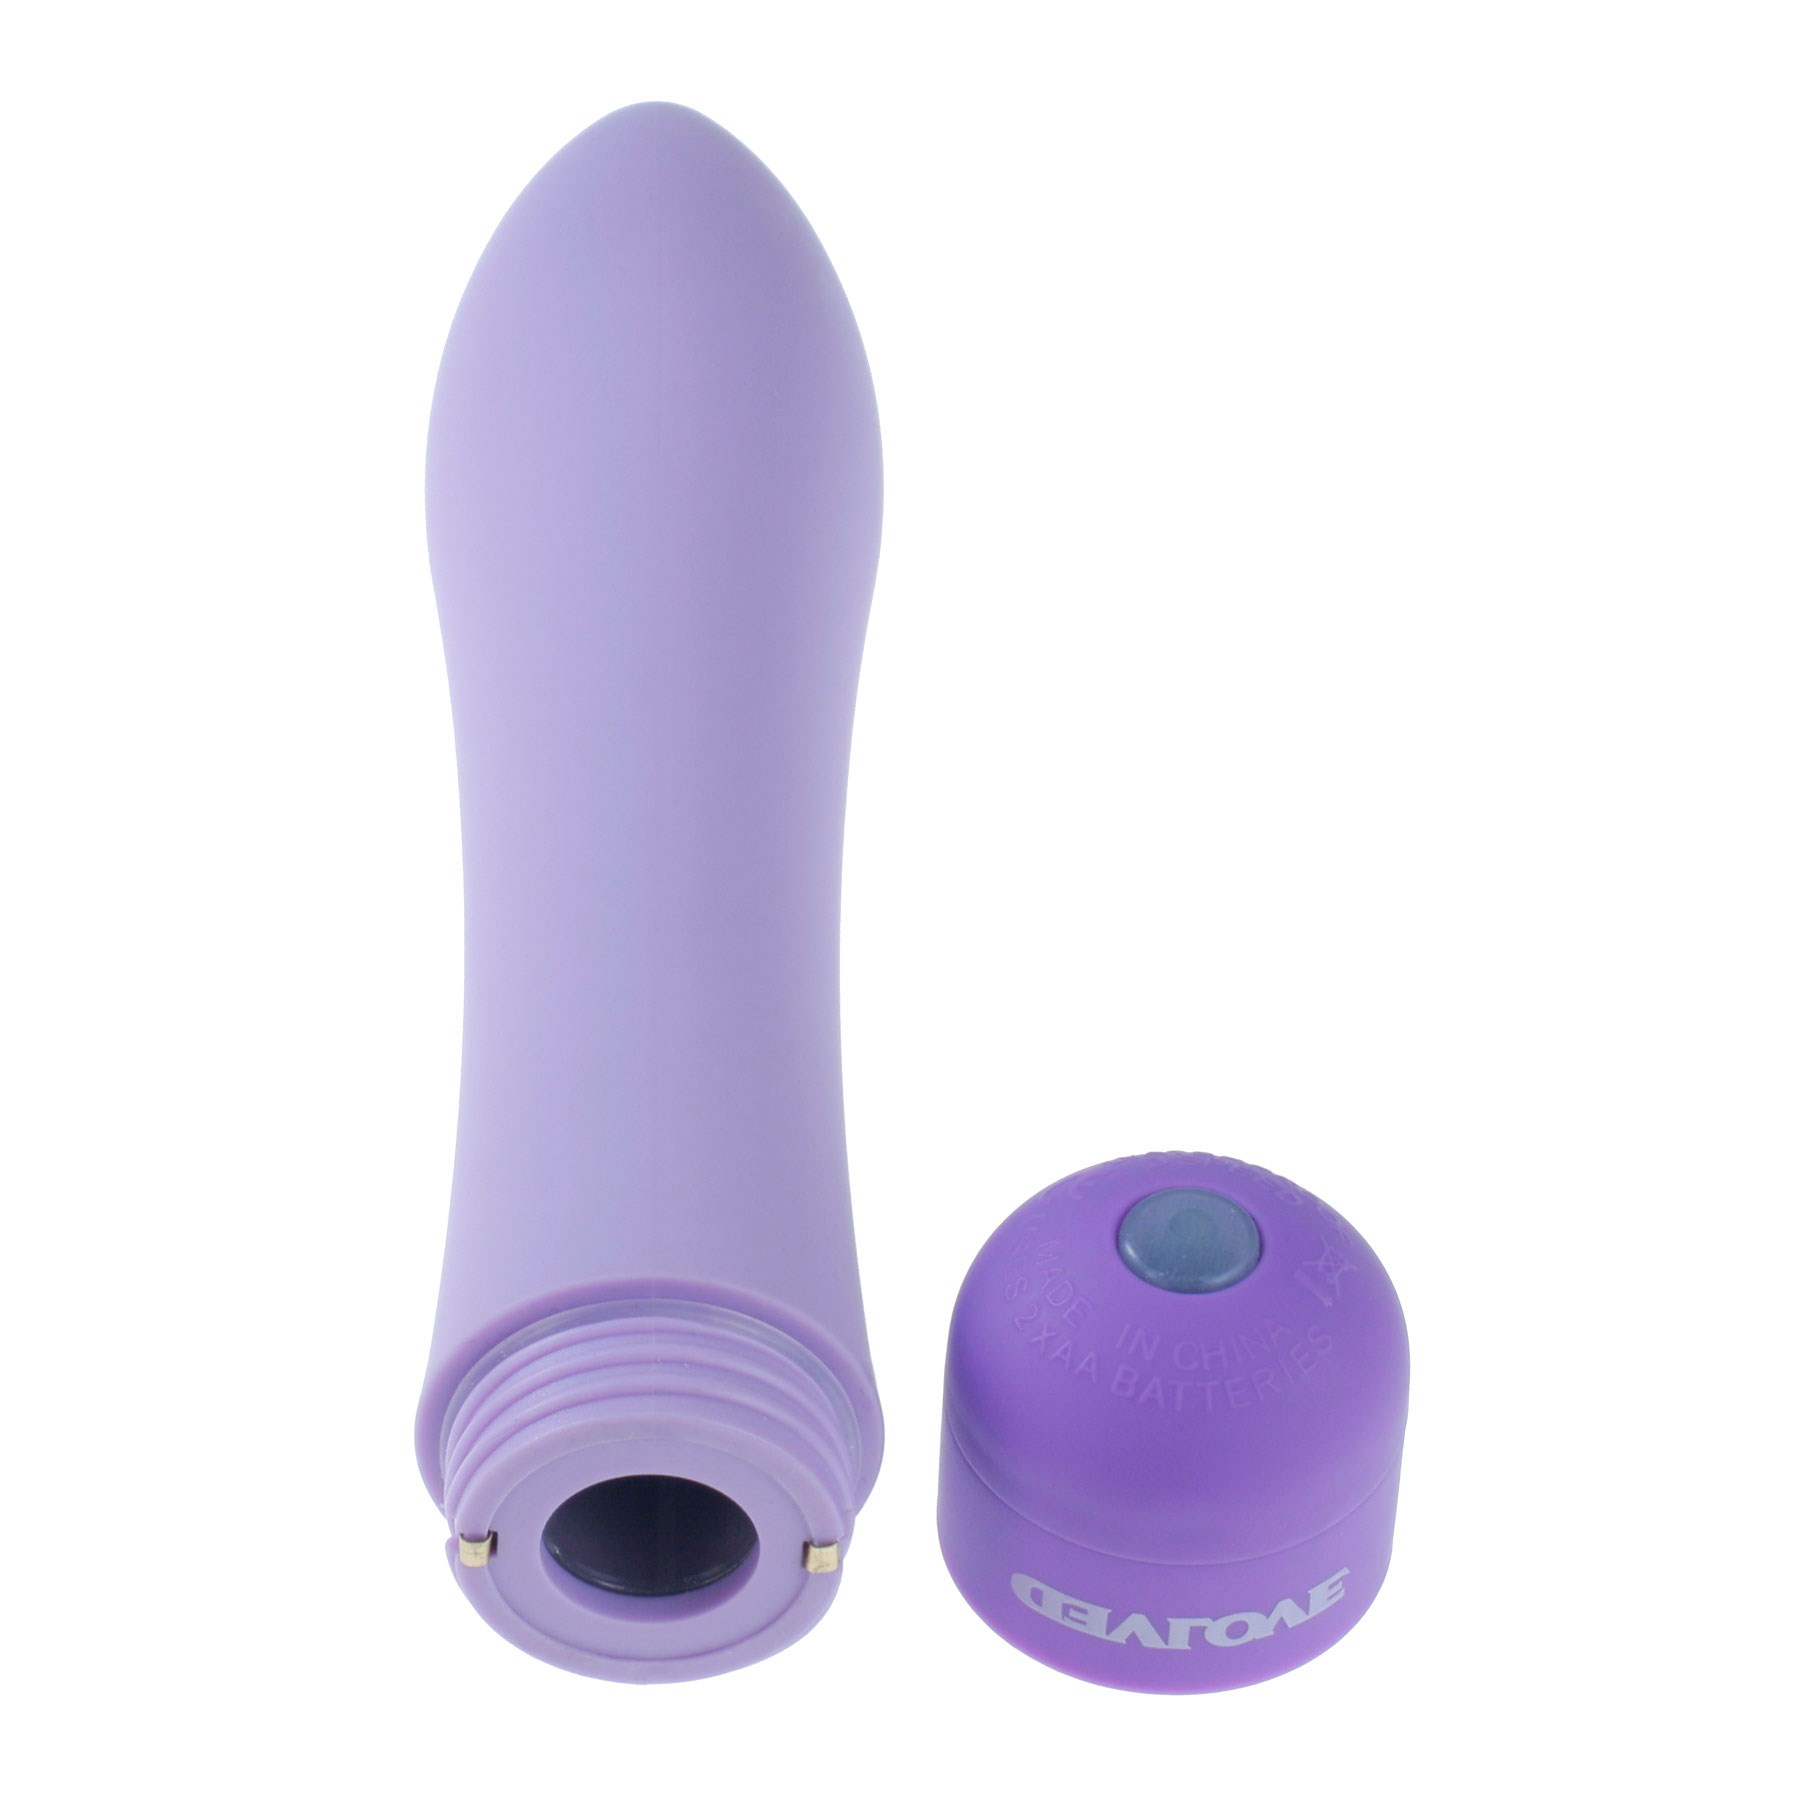 Evolved Seduction purple base unscrewed for batteries